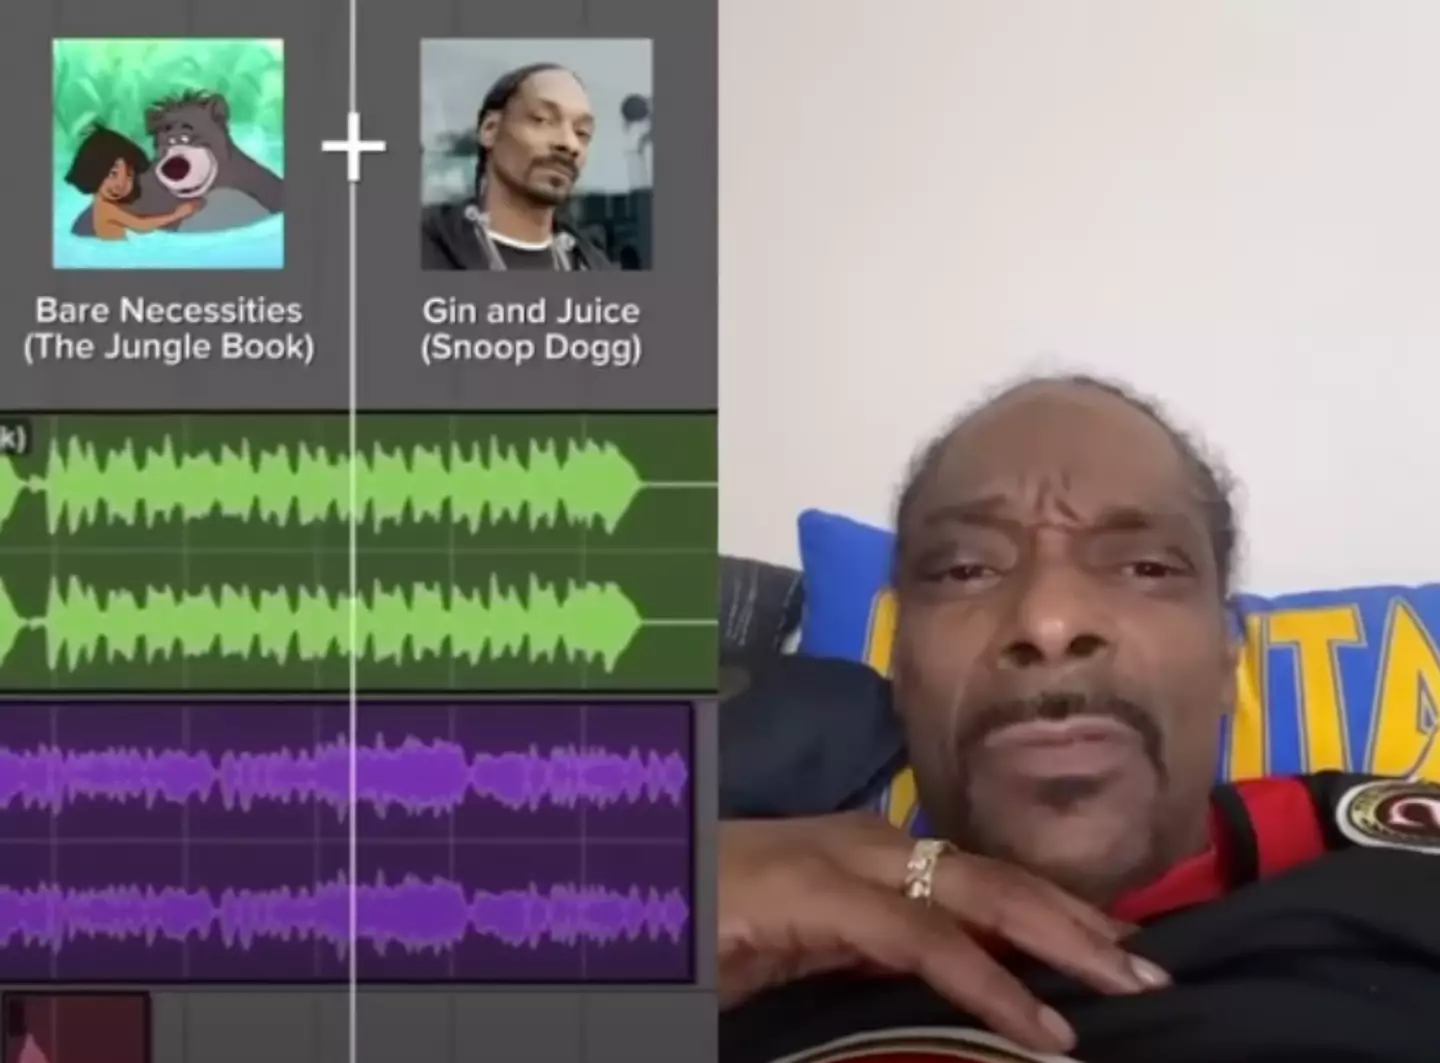 Fans think Snoop Dogg went through the ‘five stages of grief' in his reaction to Gin and Juice being remixed with The Jungle Book.